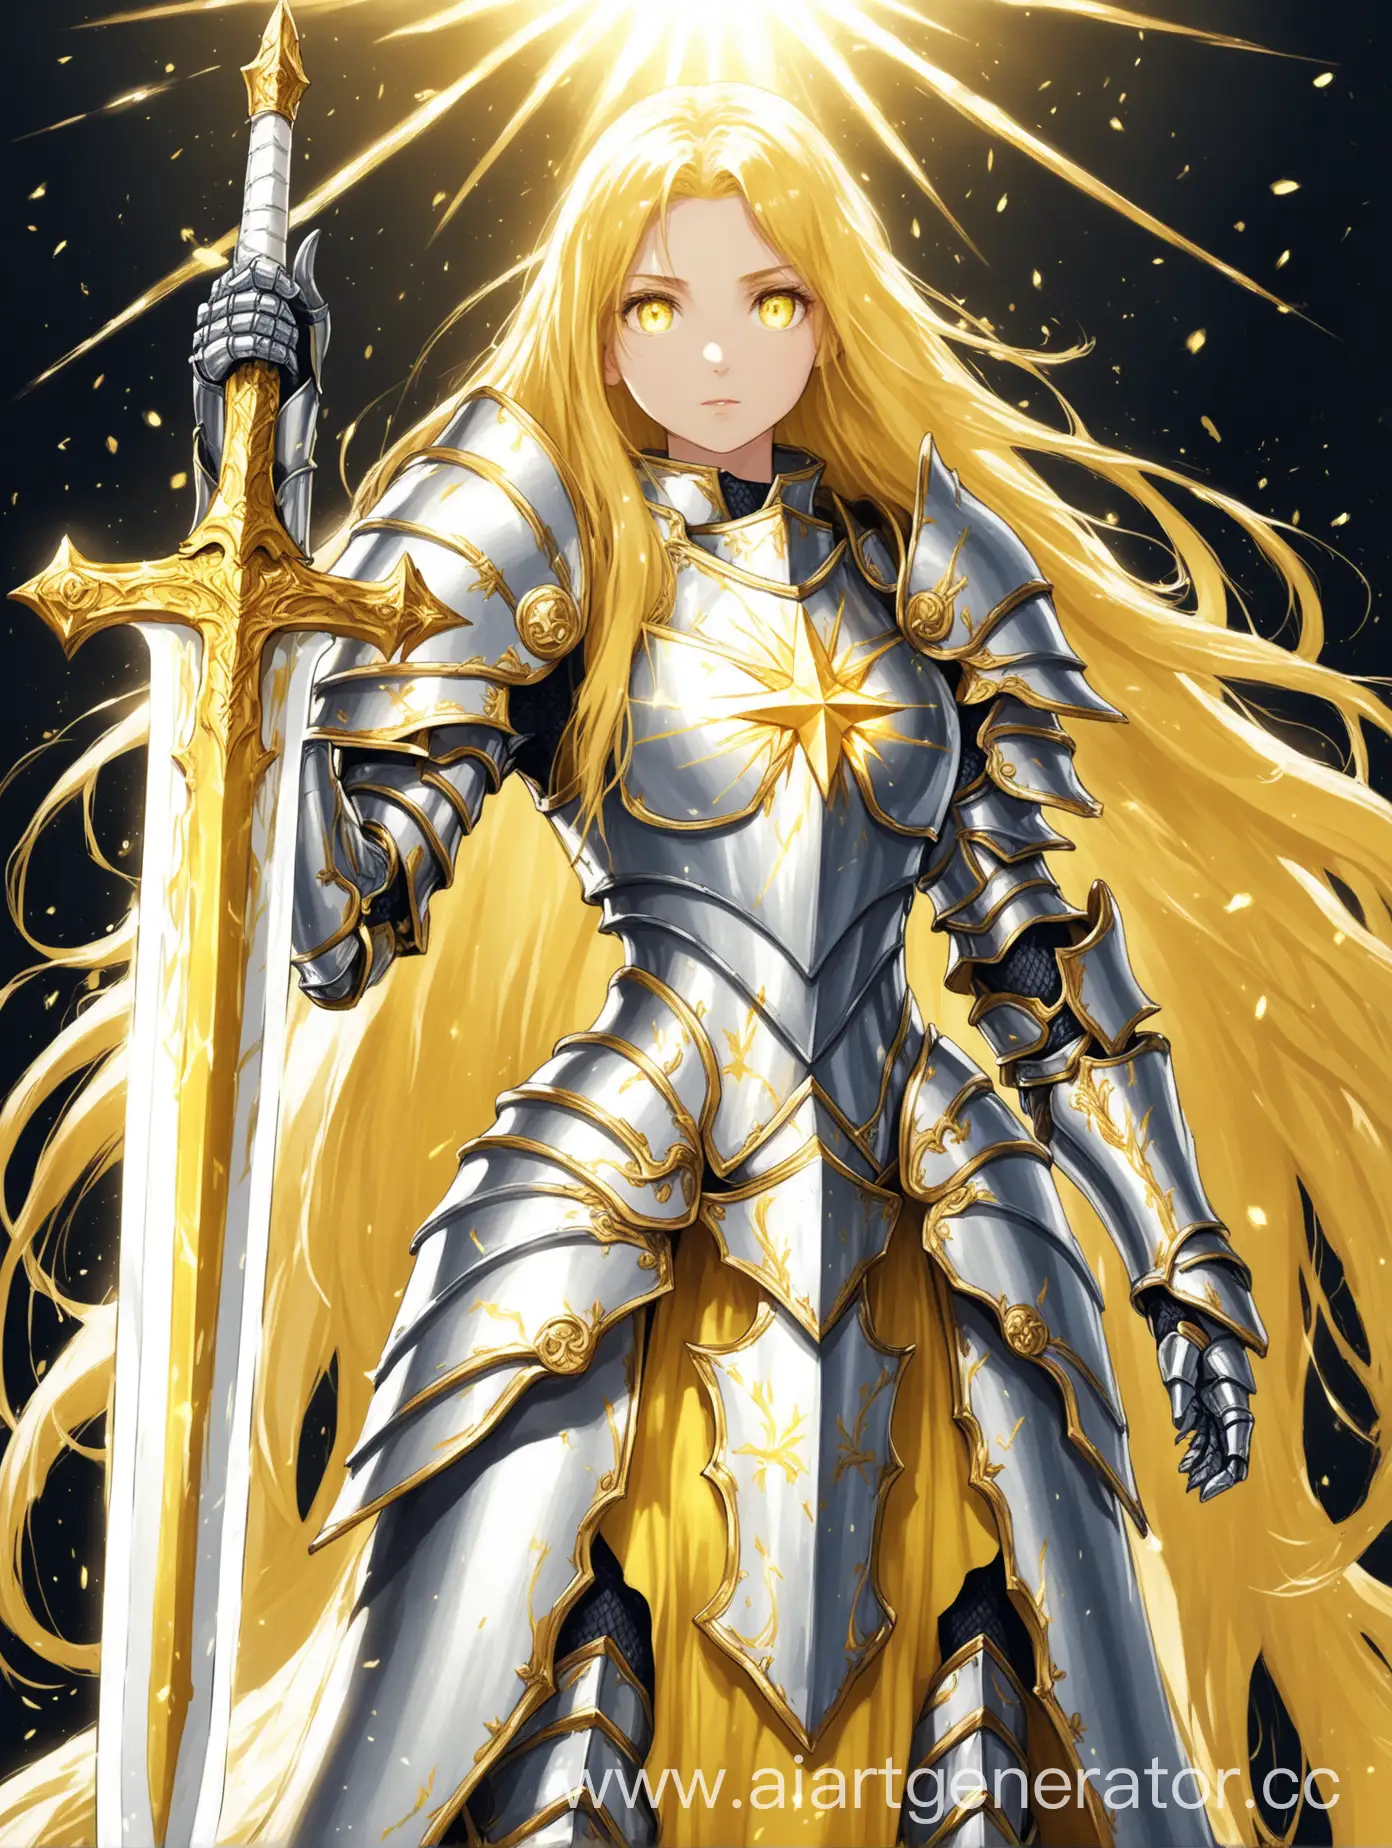 Bright-YellowWhite-Haired-Girl-in-Holy-Shining-Armor-with-Sword